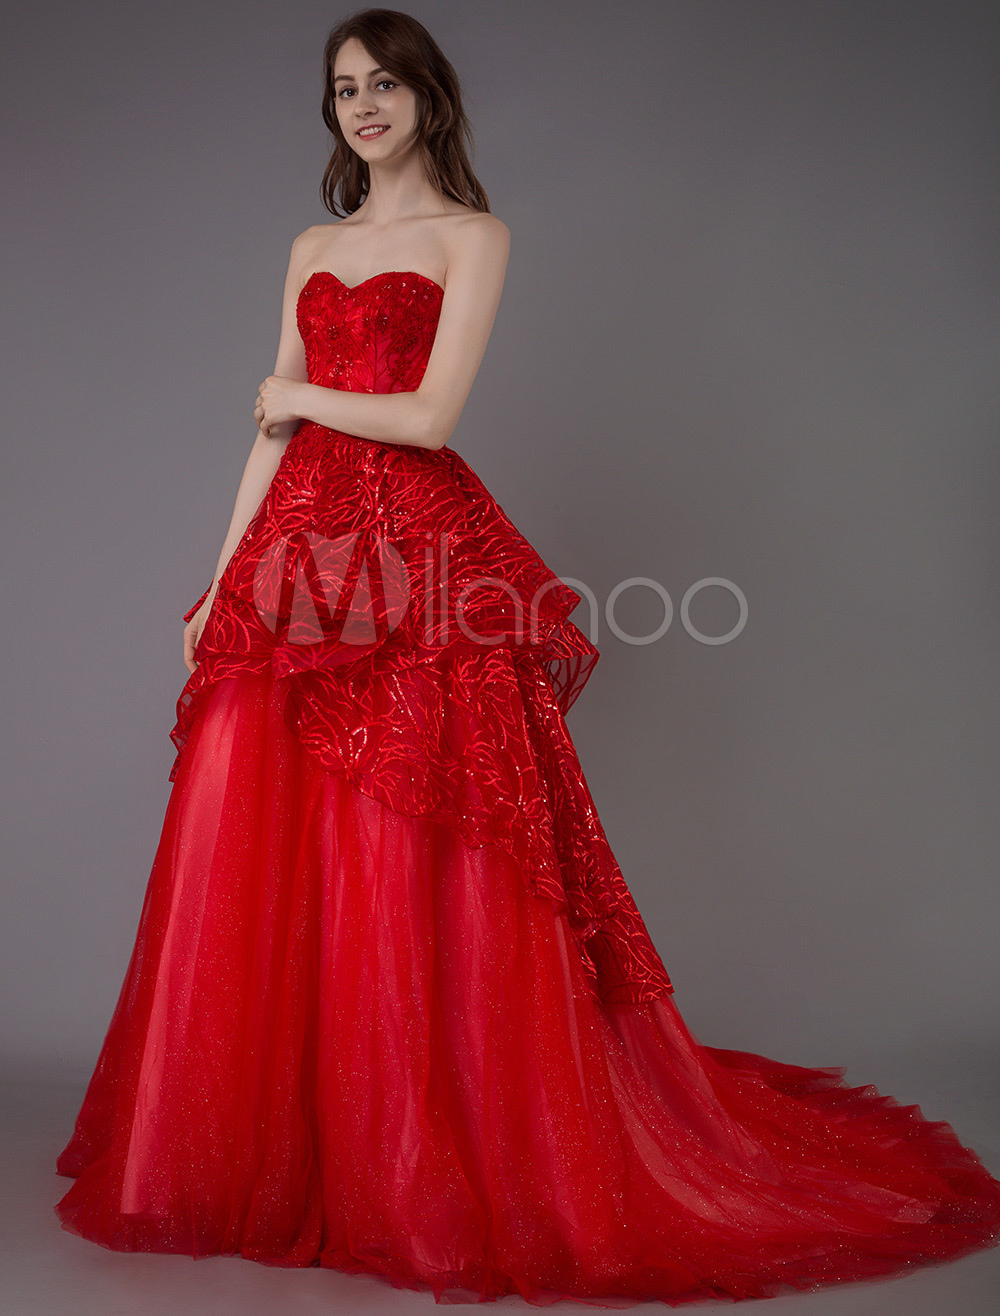 Red Prom Dress 2022 Princess Sweetheart Sleeveless Lace Sequins Formal ...